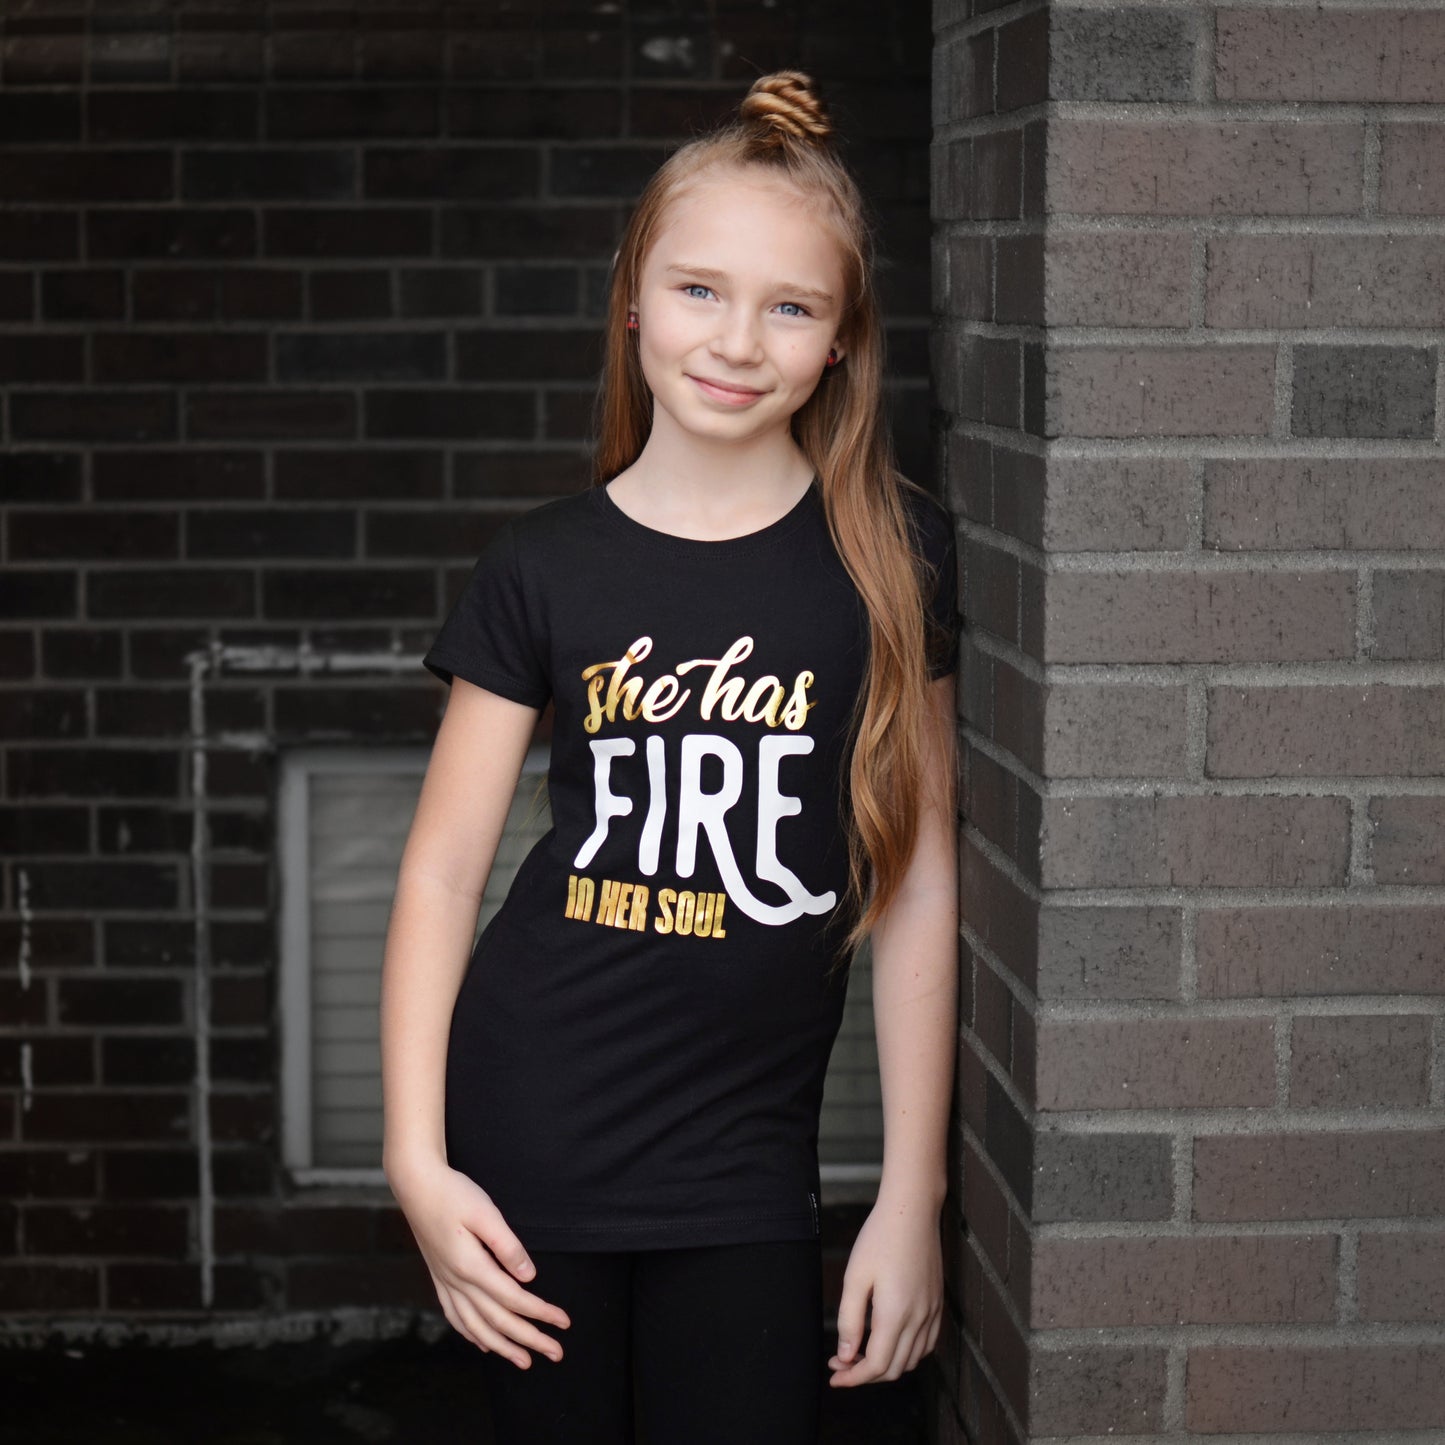 SHE HAS FIRE IN HER SOUL Short Sleeve T-shirt FABVOKAB